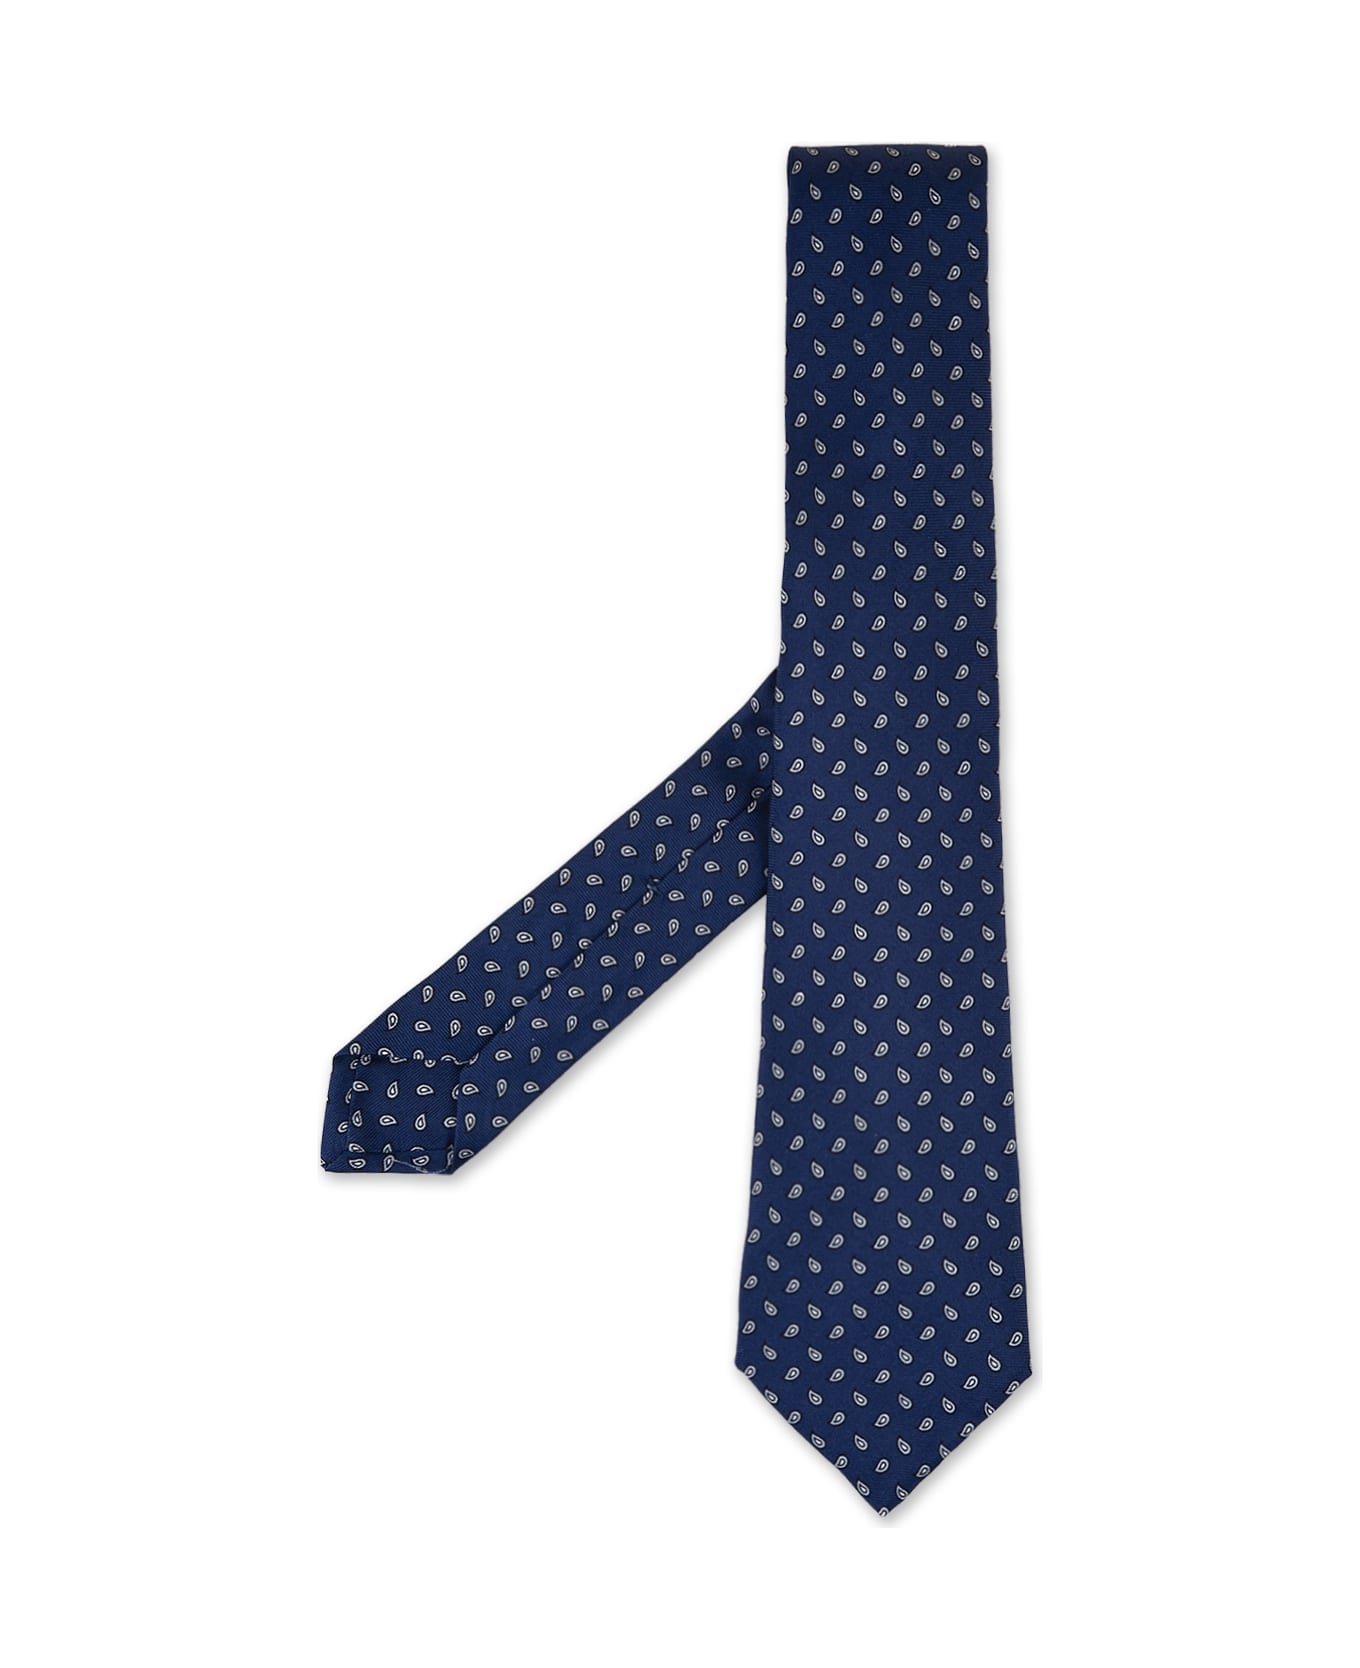 Kiton Blue Tie With Drops Pattern - Blue